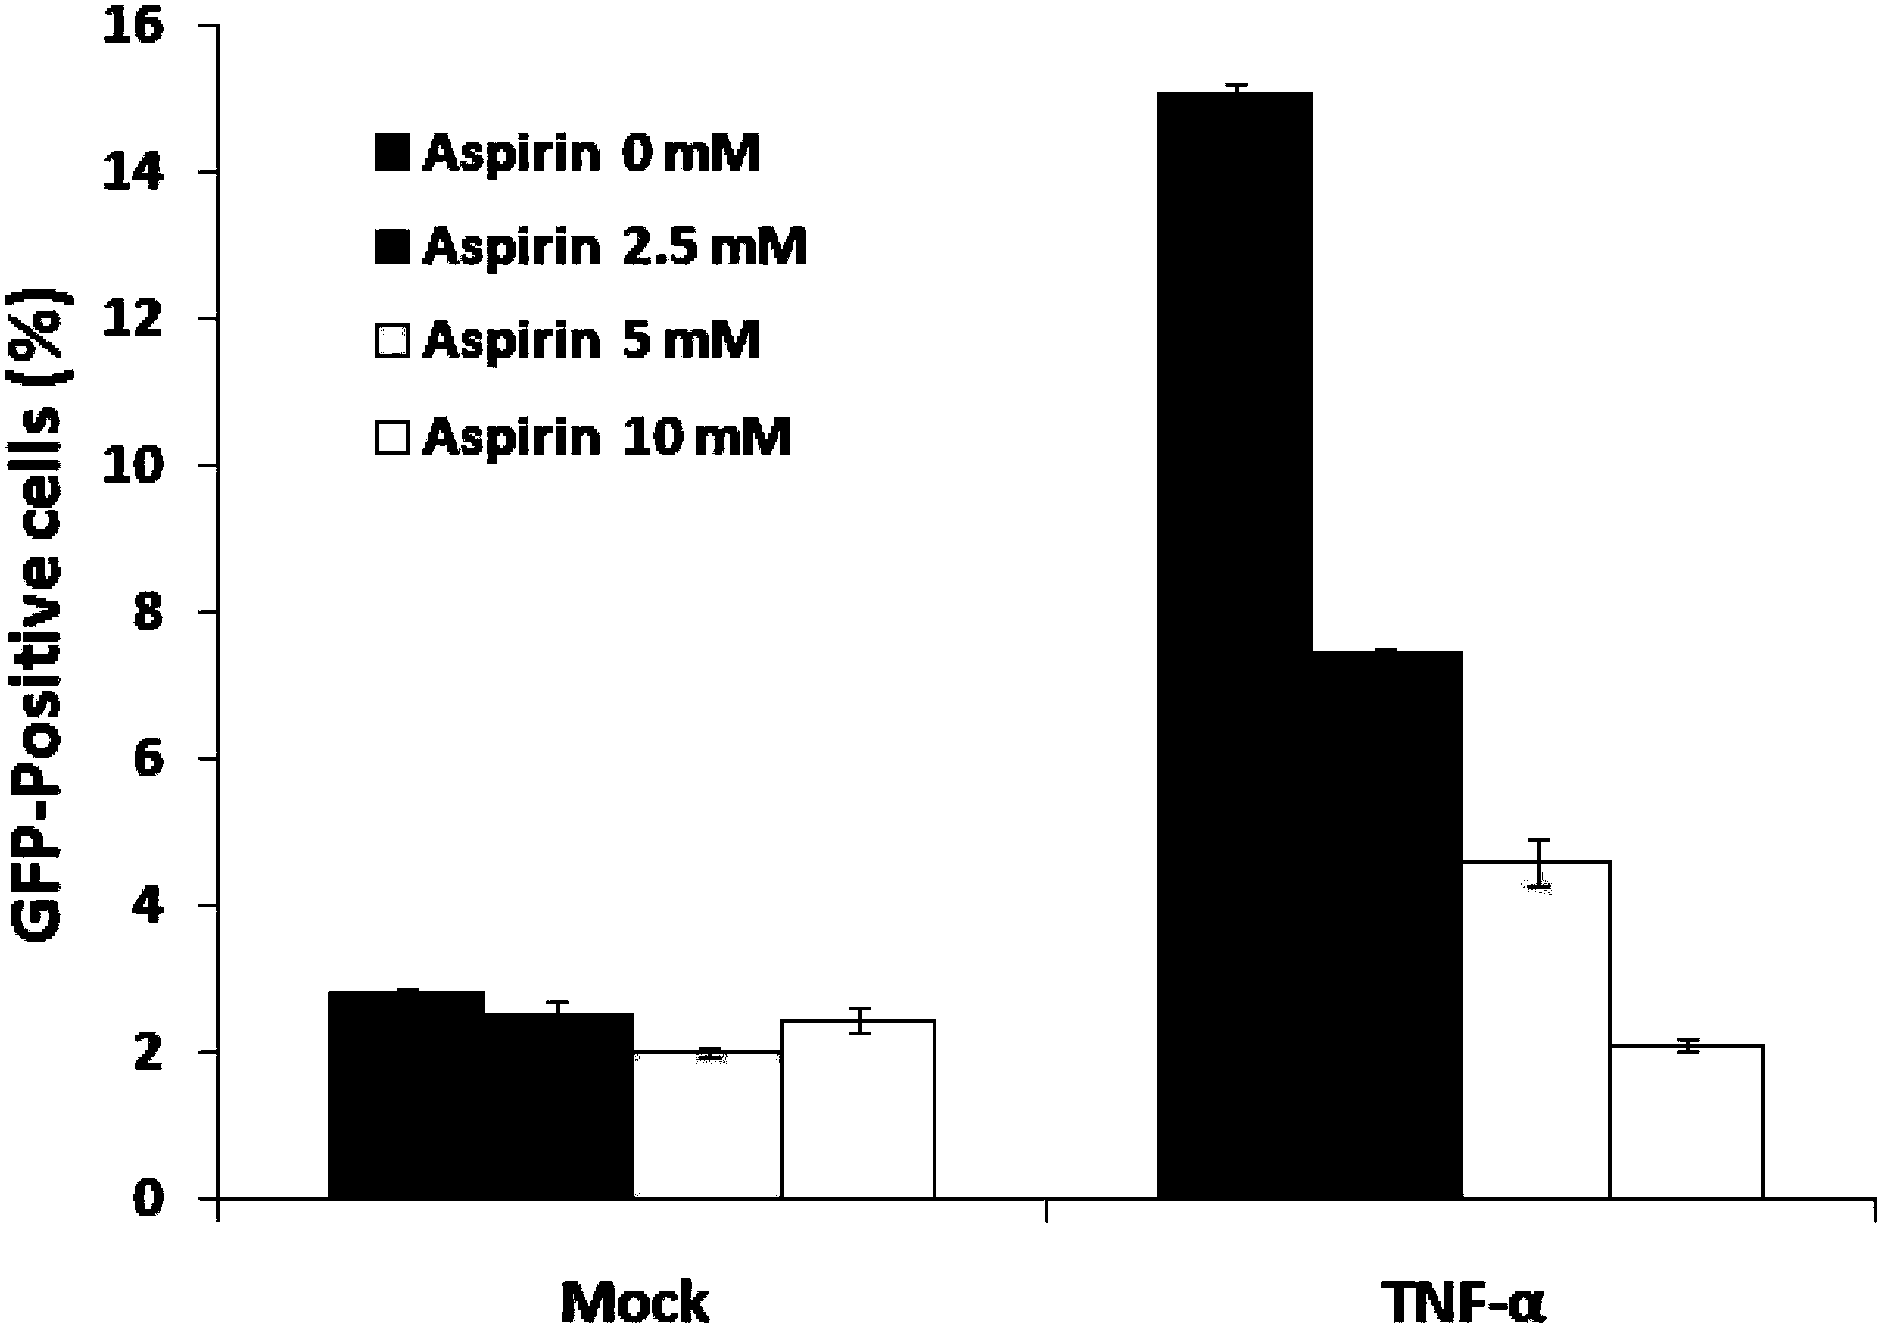 Application of aspirin in preparing anti-AIDs (Acquired Immune Deficiency Syndrome) drugs